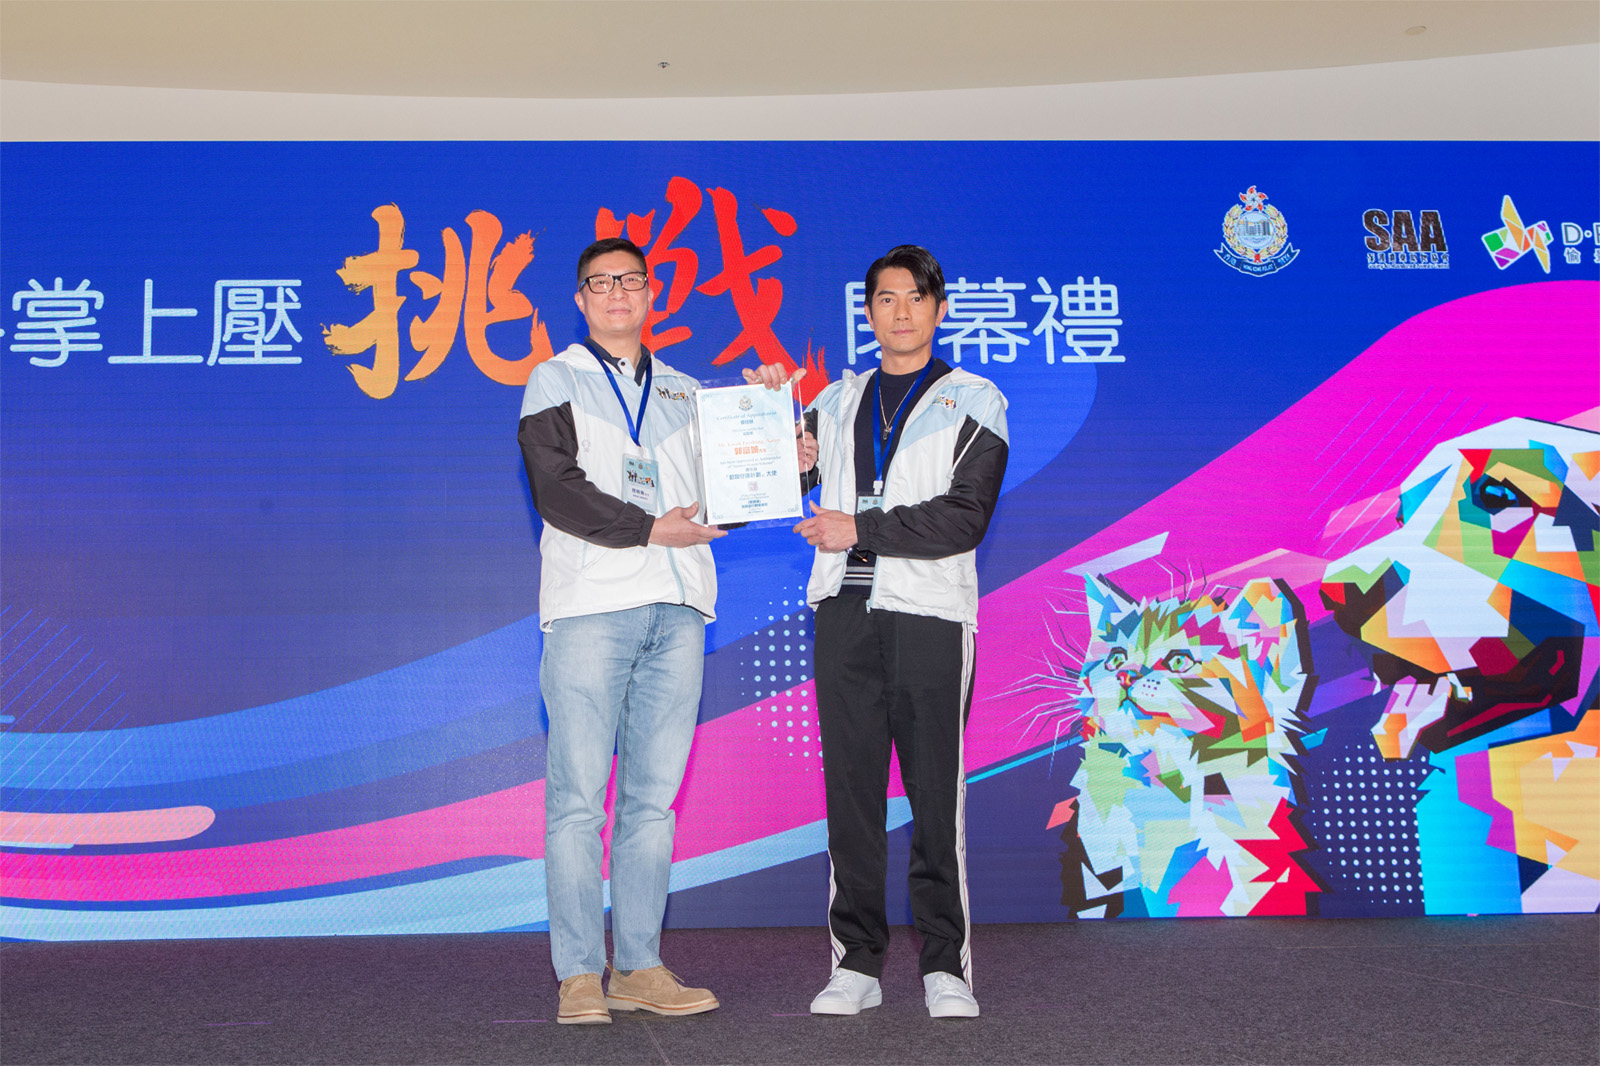 The Police has appointed Artist, Mr. Aaron KWOK Fu-shing as the Ambassador of the AWS in April 2018.